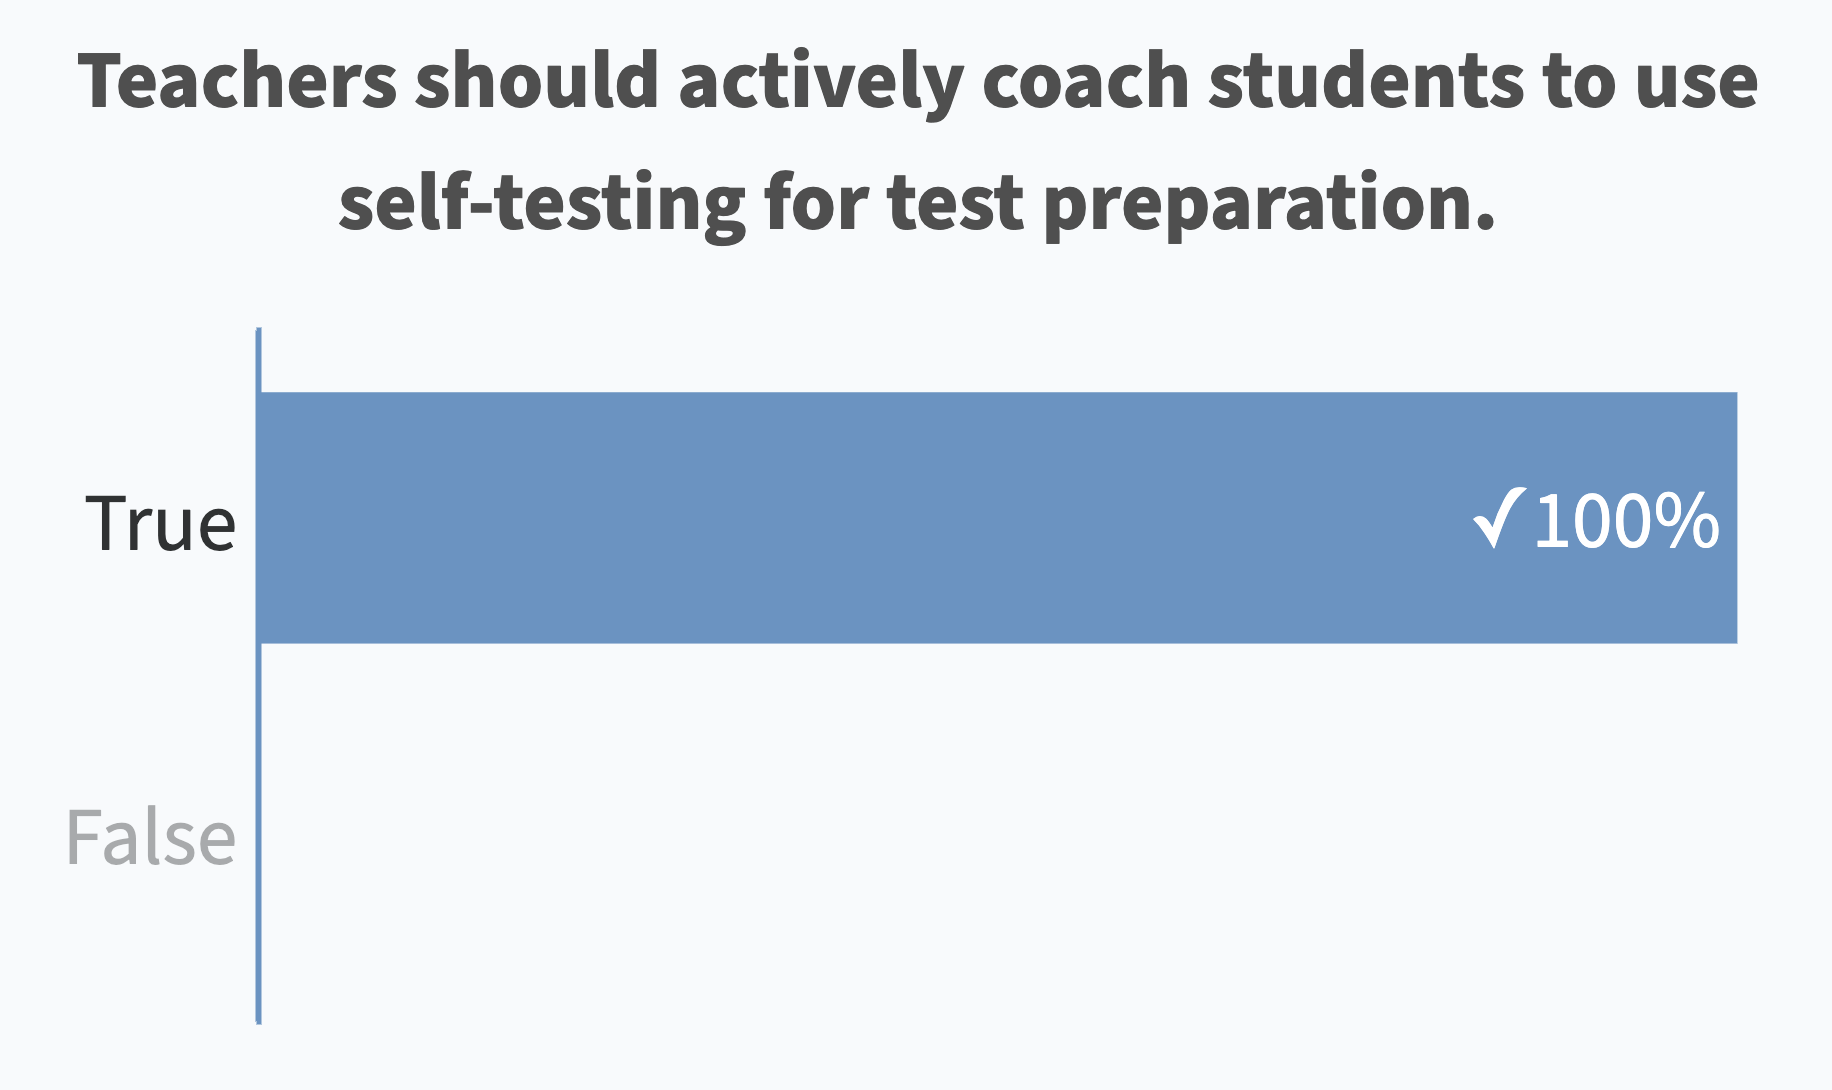 Teachers should actively coach students to use self-testing for test preparation. (True: 100% correct)